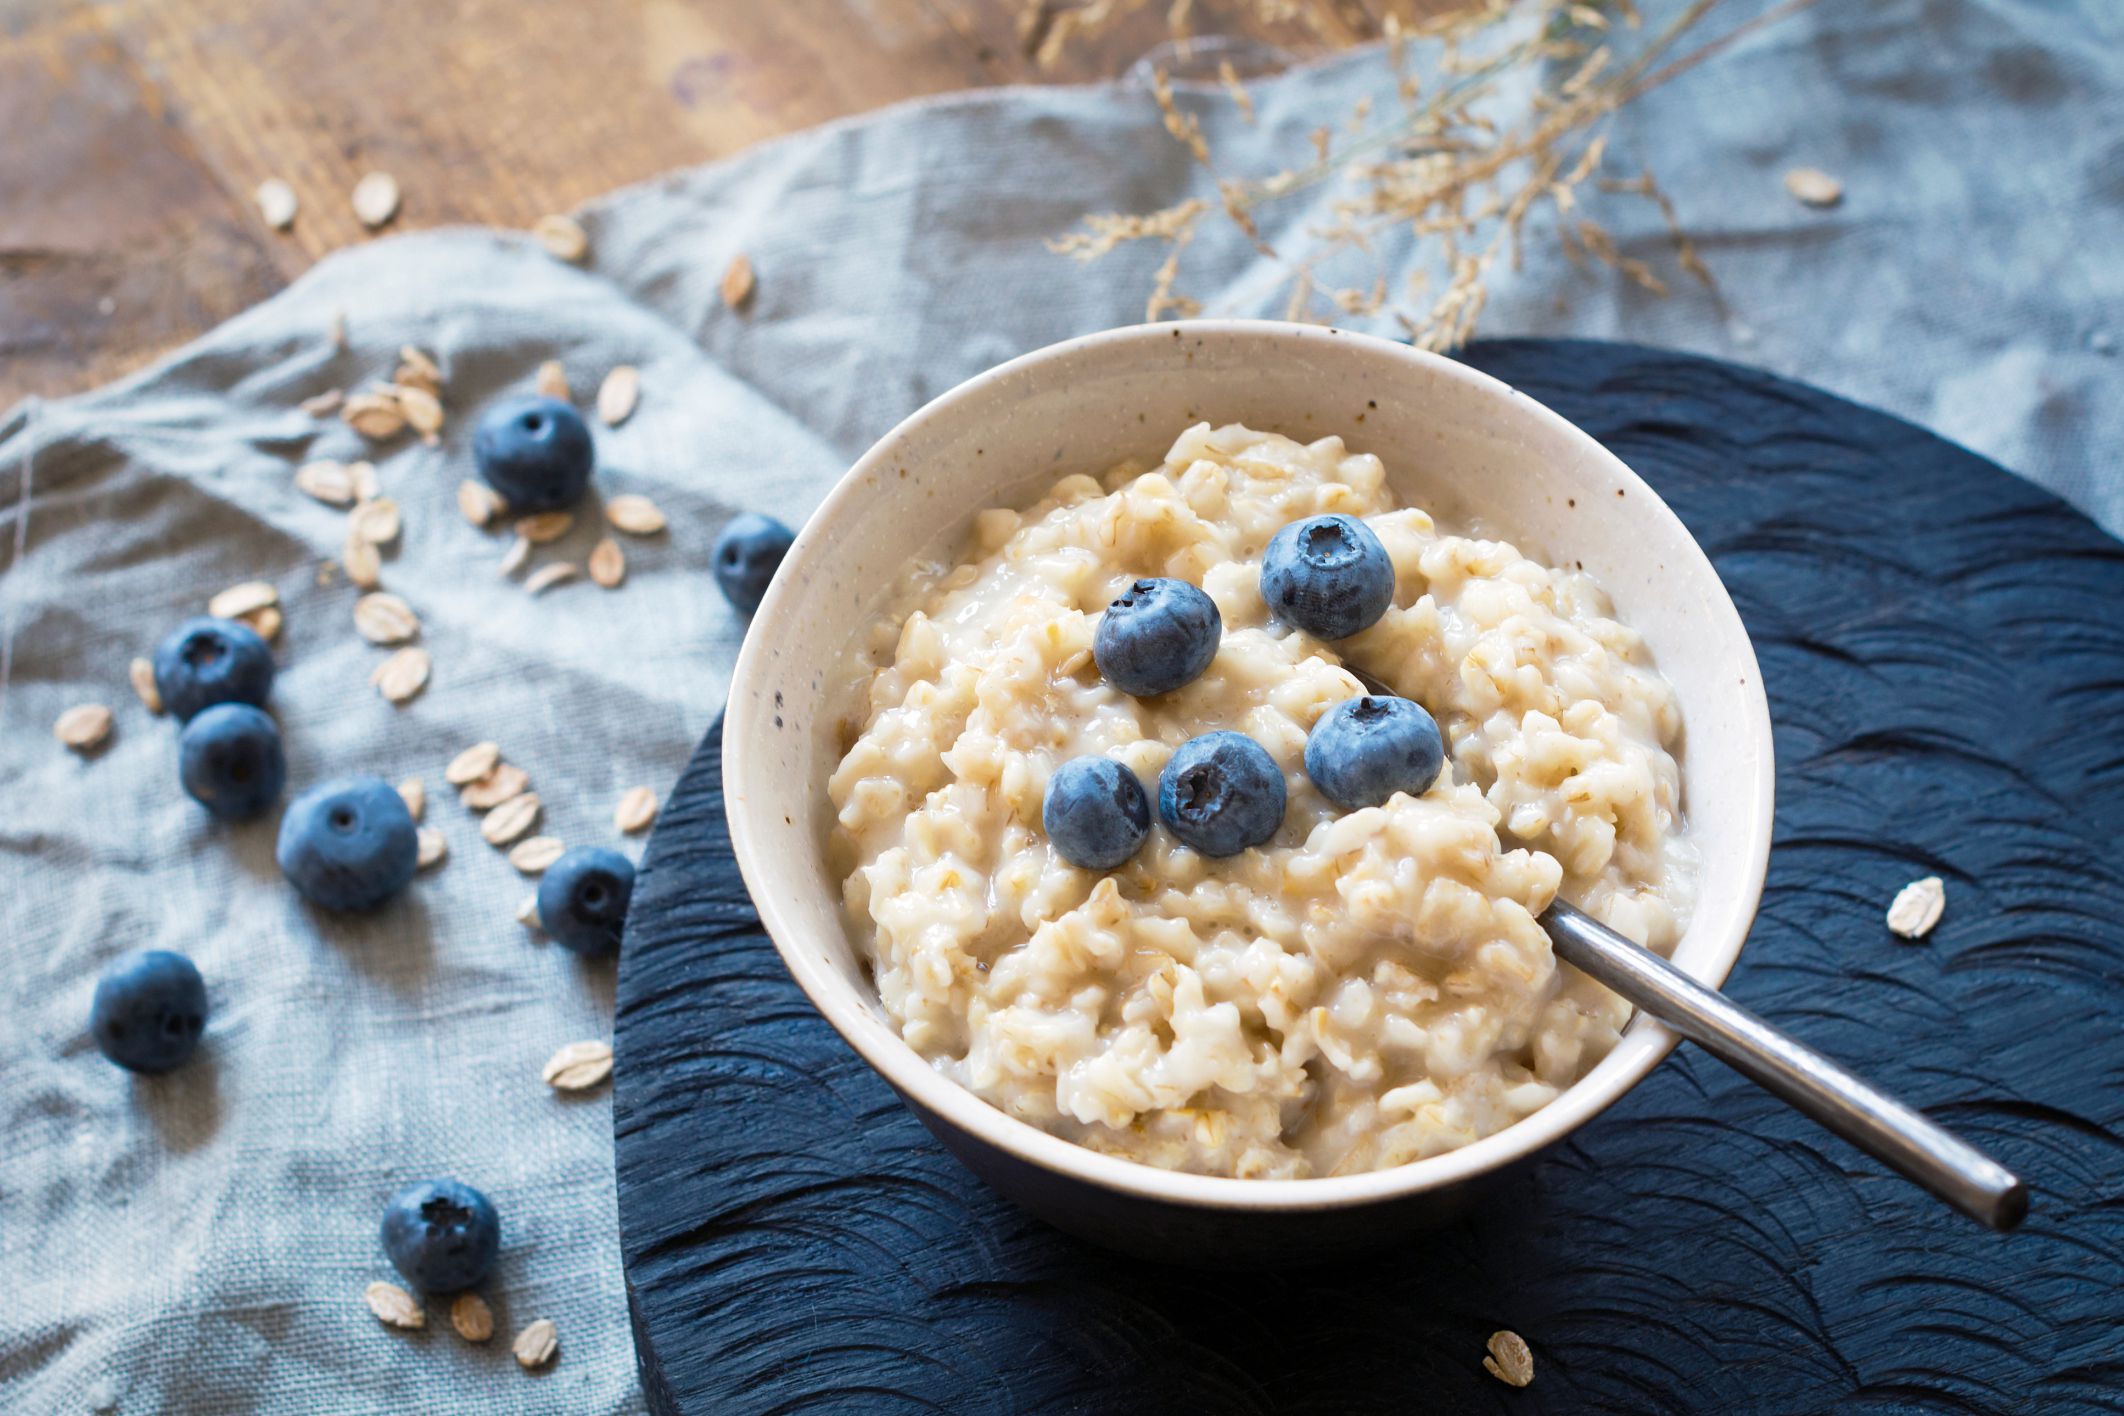 Is Oatmeal Gluten-Free and Can Celiacs Eat Oats?